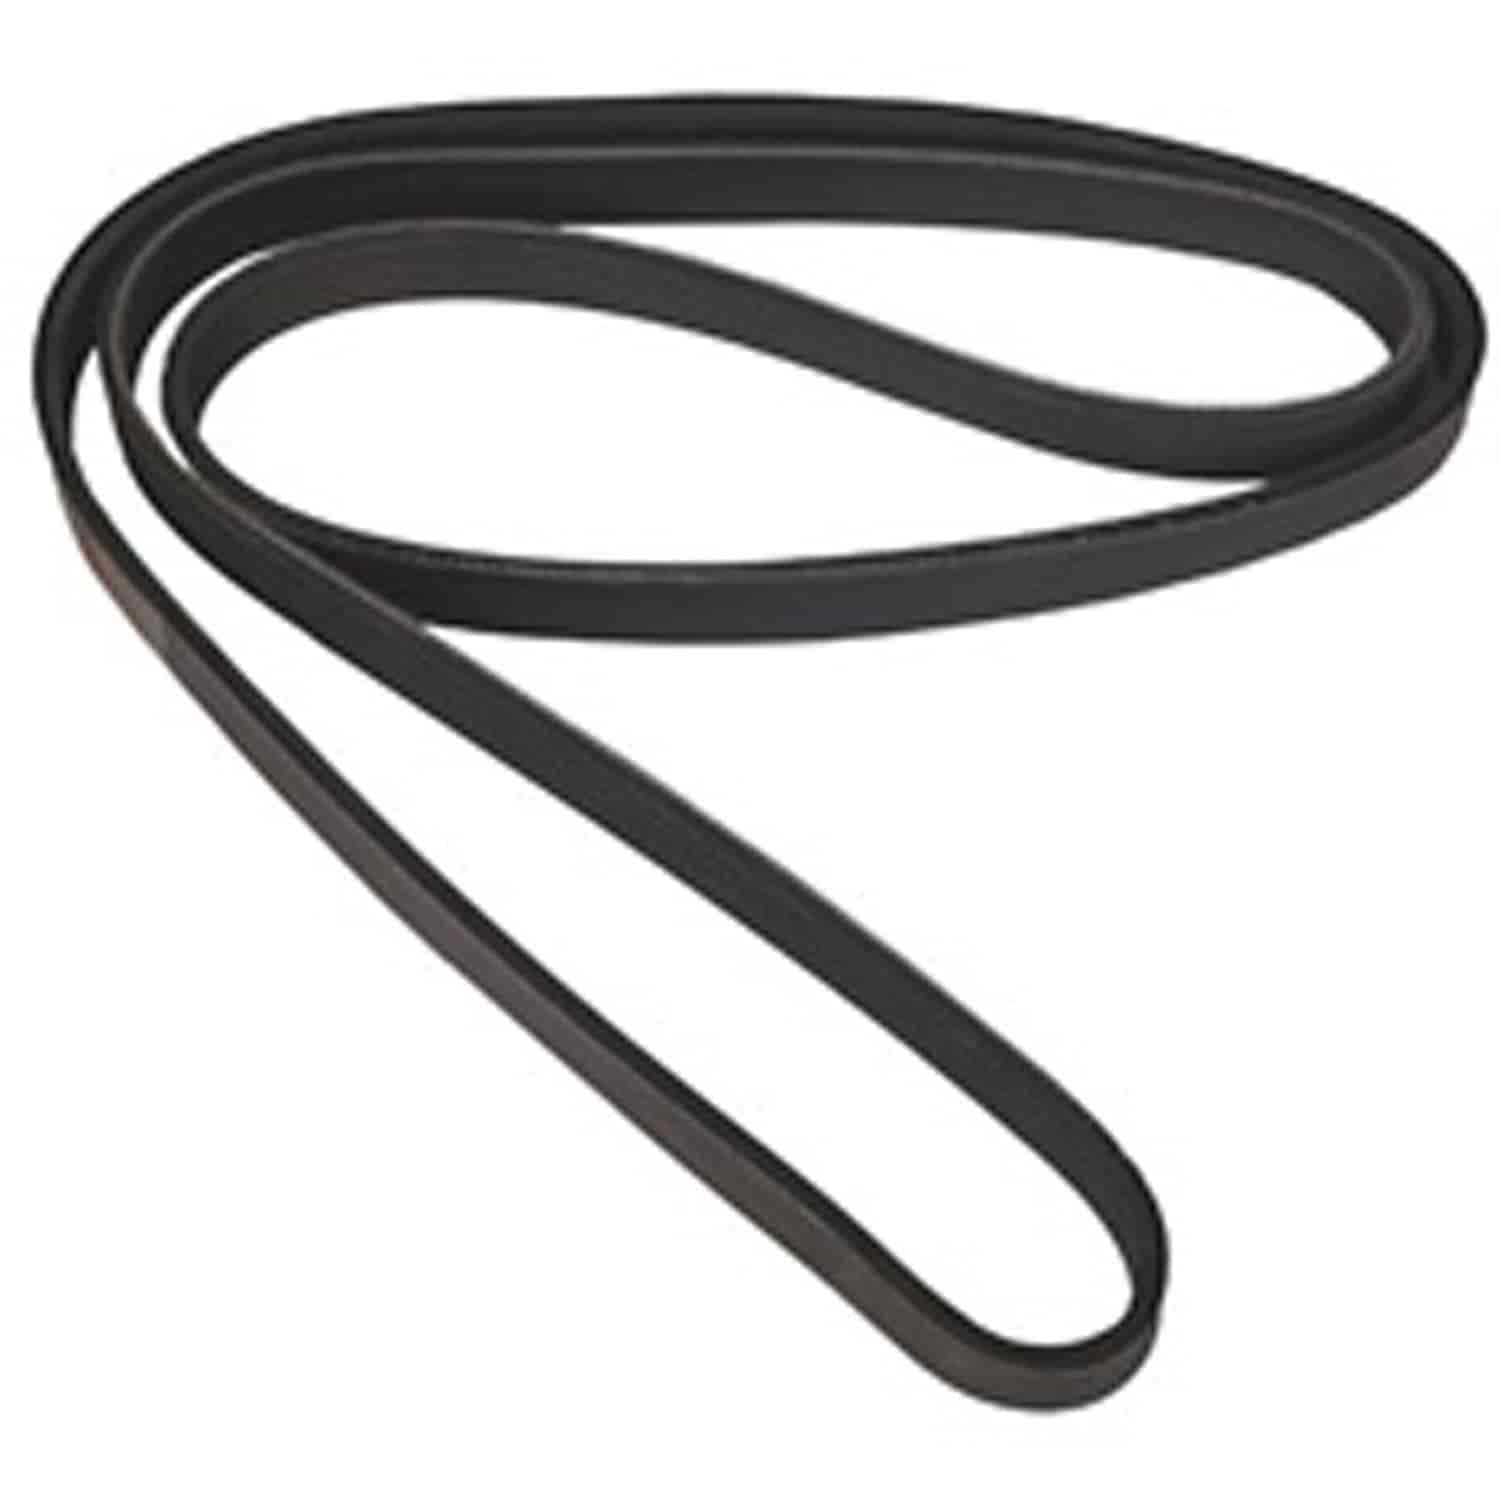 Replacement serpentine belt from Omix-ADA, Fits 87-90 Jeep Wrangler YJ with 6-cylinder engin